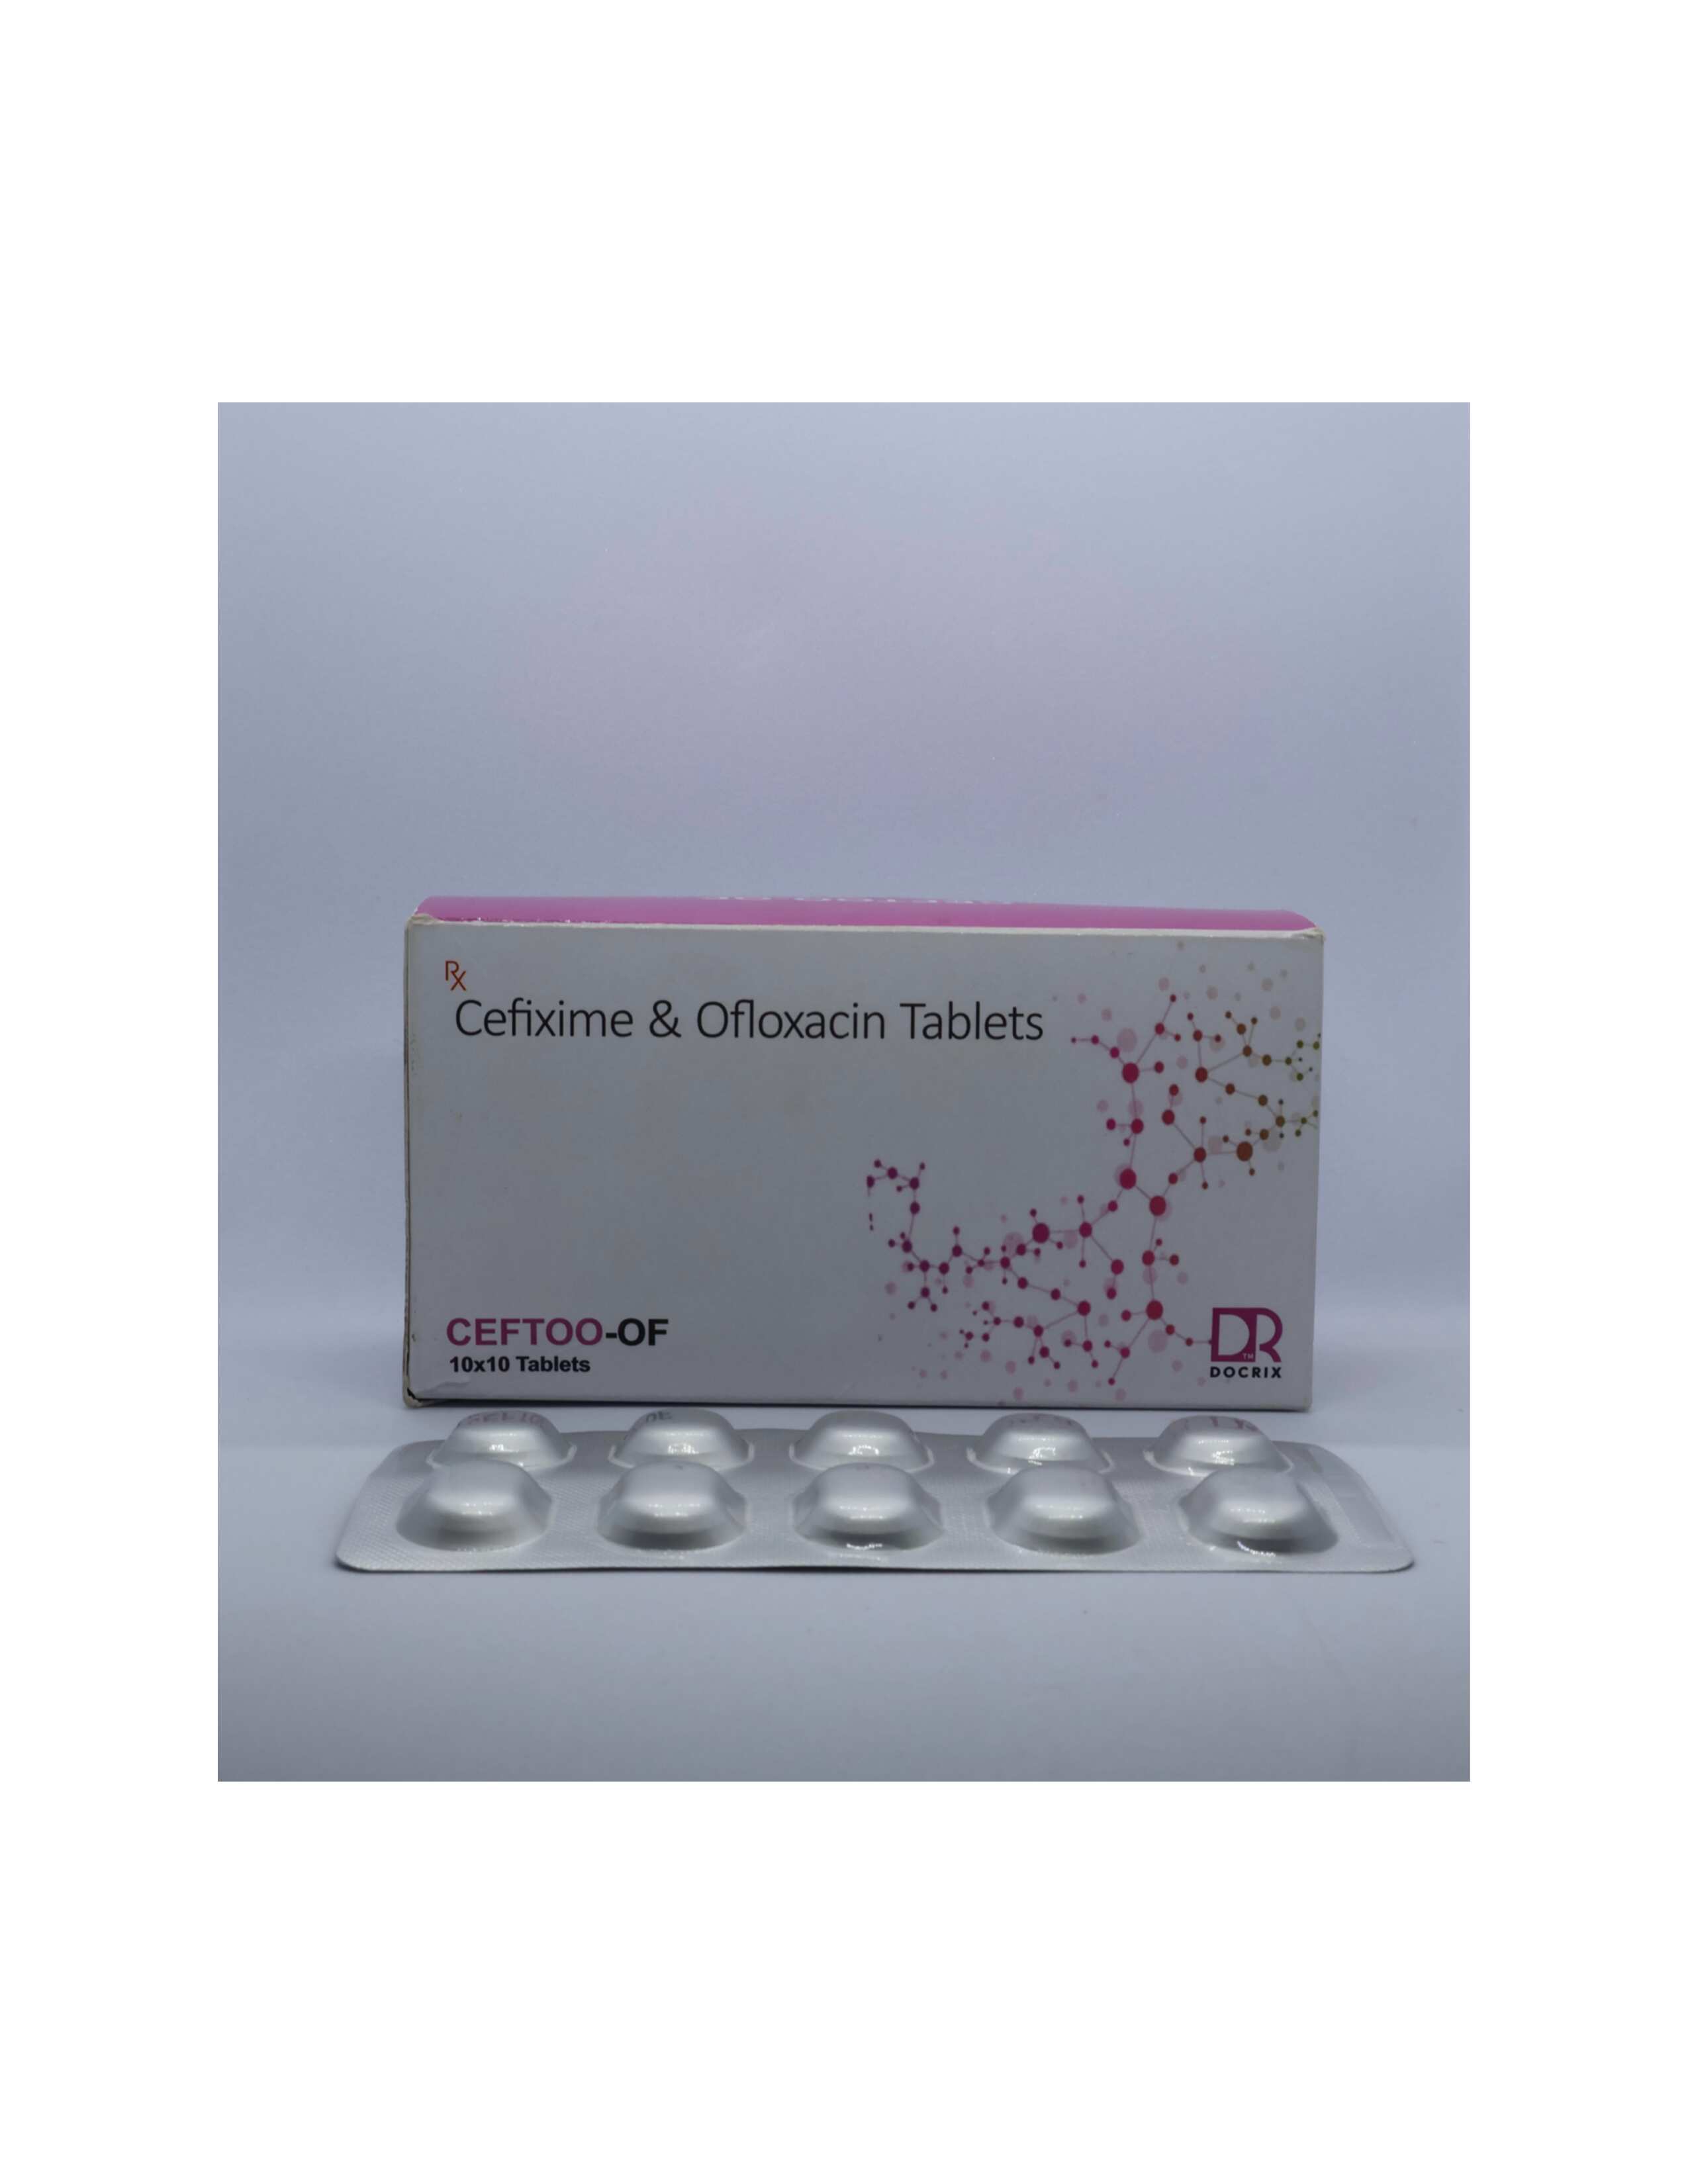 Product Name: Ceftoo OF, Compositions of Ceftoo OF are Cefixime & Ofloxacin Tablets - Docrix Healthcare